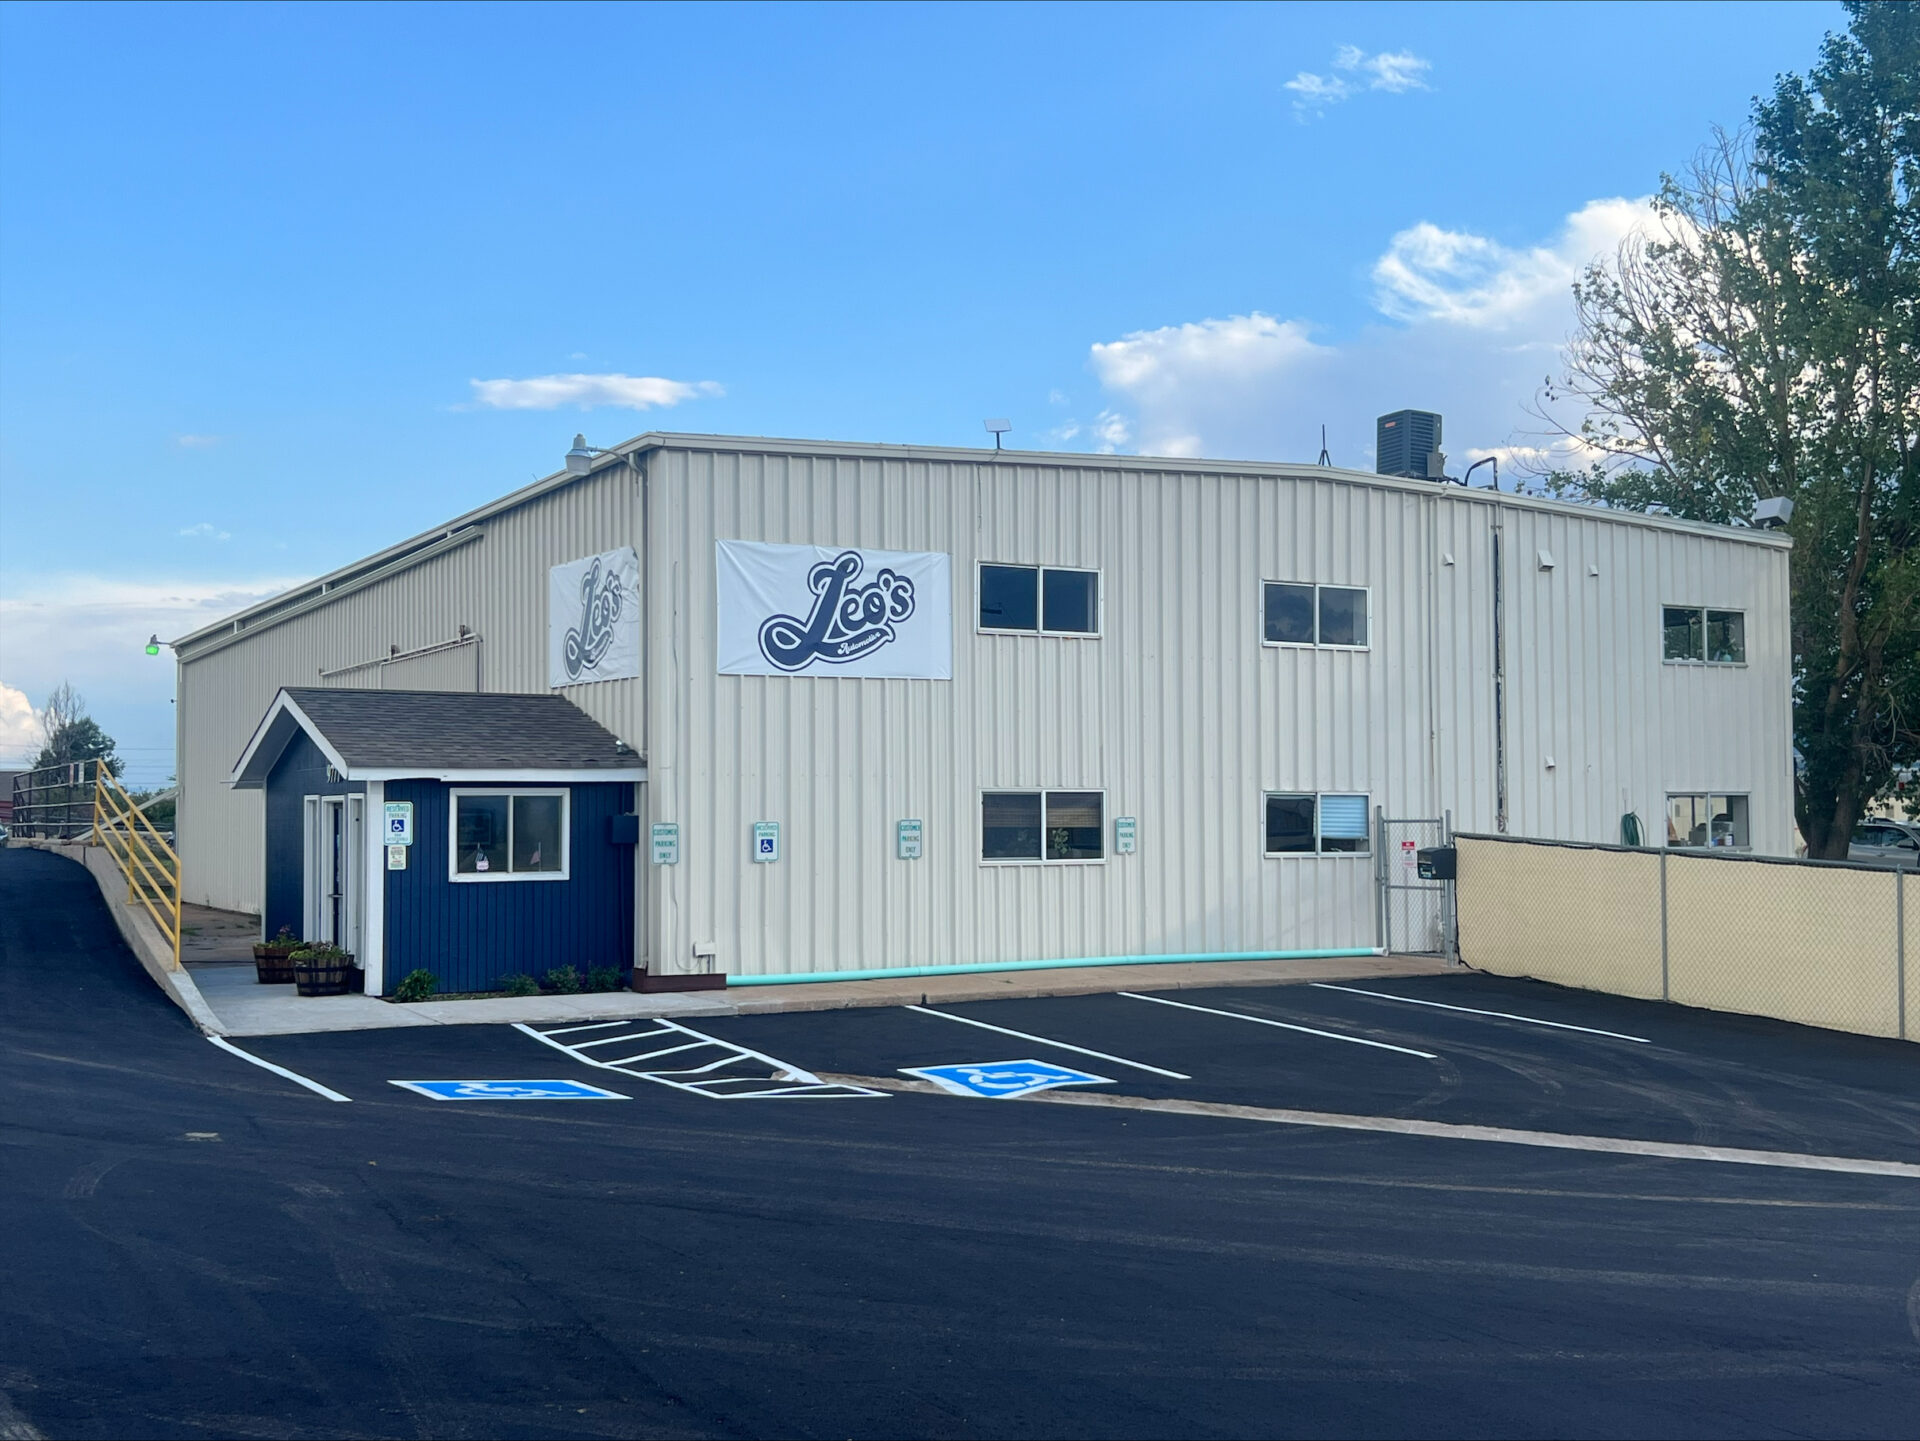 exterior view of Leo's Auto Body shop and parking lot